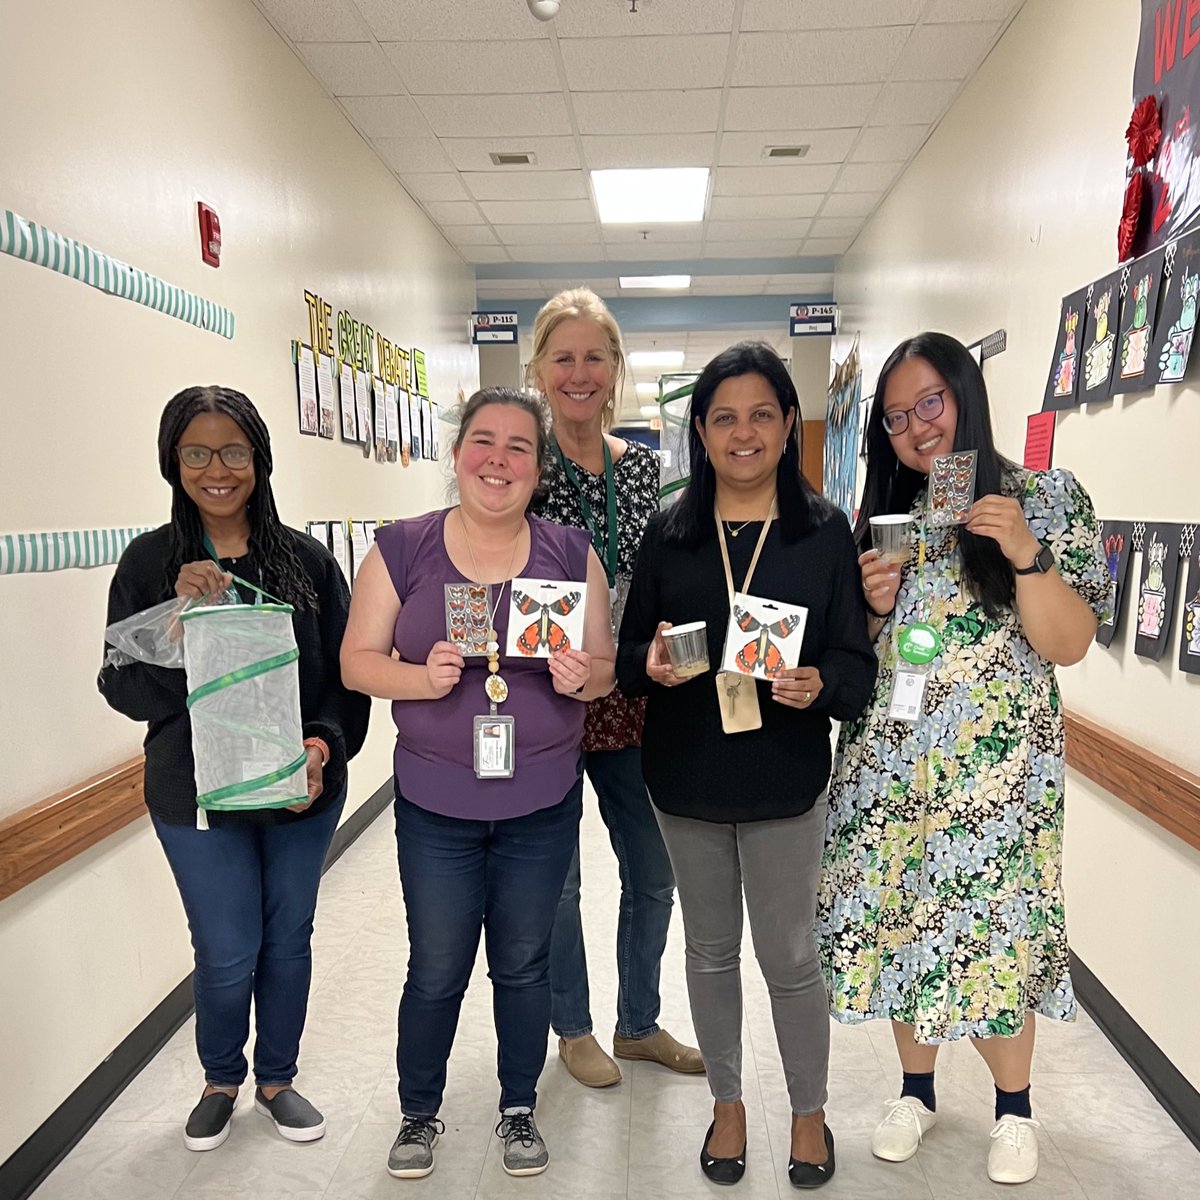 The 2nd grade team is all a flutter thanks to our wonderful PTA! 🐛🦋 #lifecycle #metamorphosis  @MrsHarrisSBCE @rajteach @I_MissYu  @MsmosesSBCE & Ms.Holmes